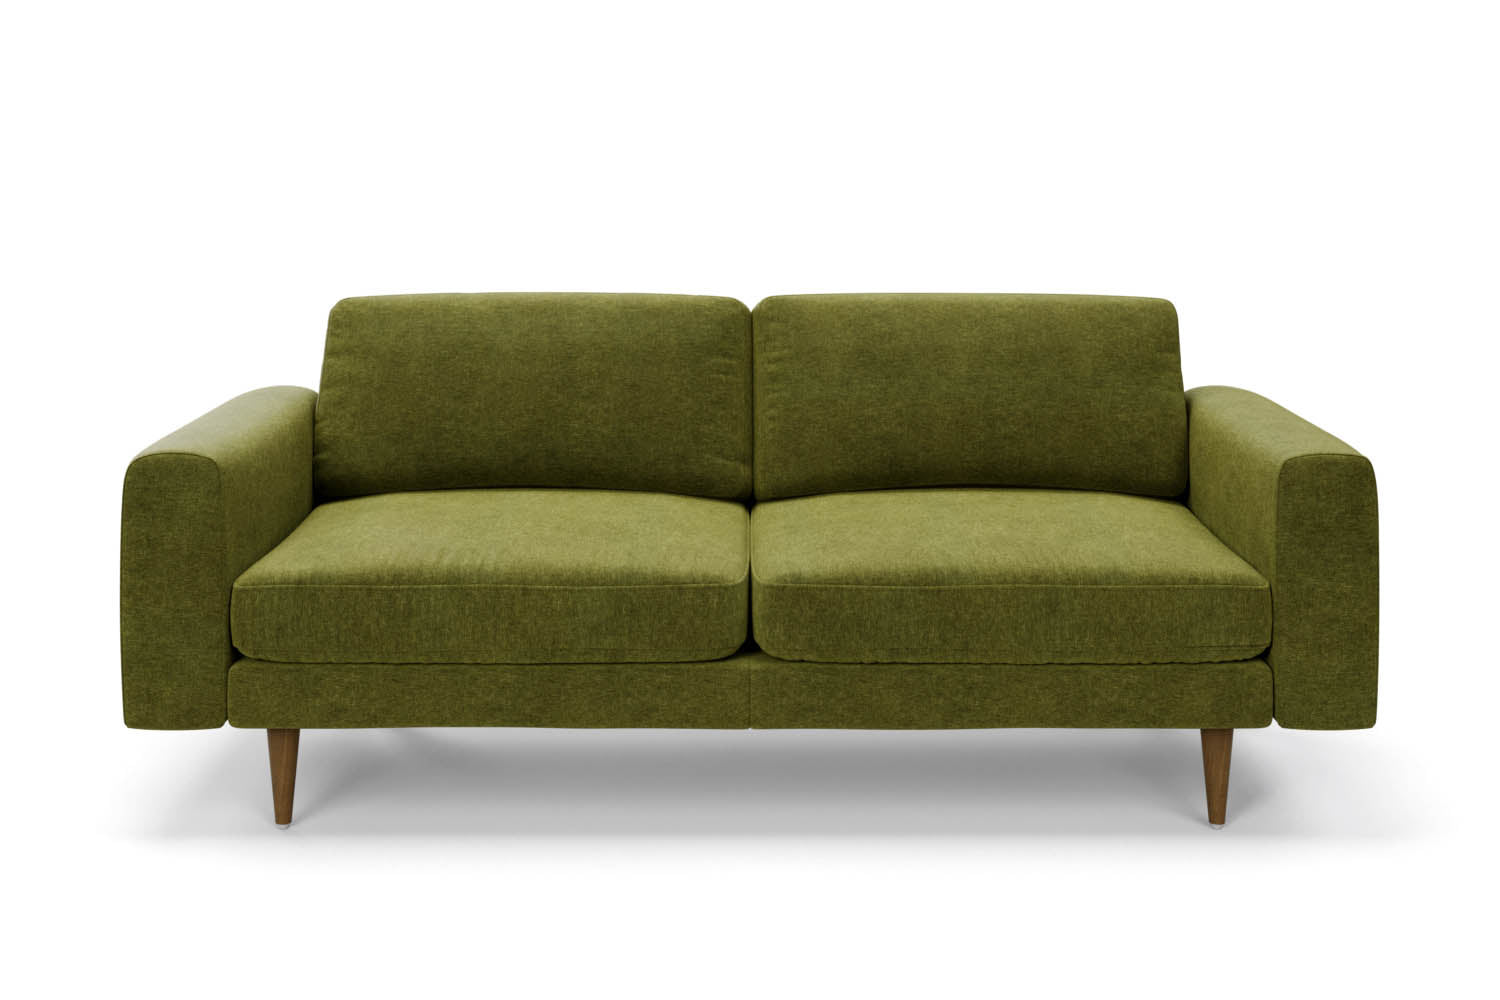 The Big Chill 3 Seater Sofa in Moss Chenille with brown legs front variant_40886288187440